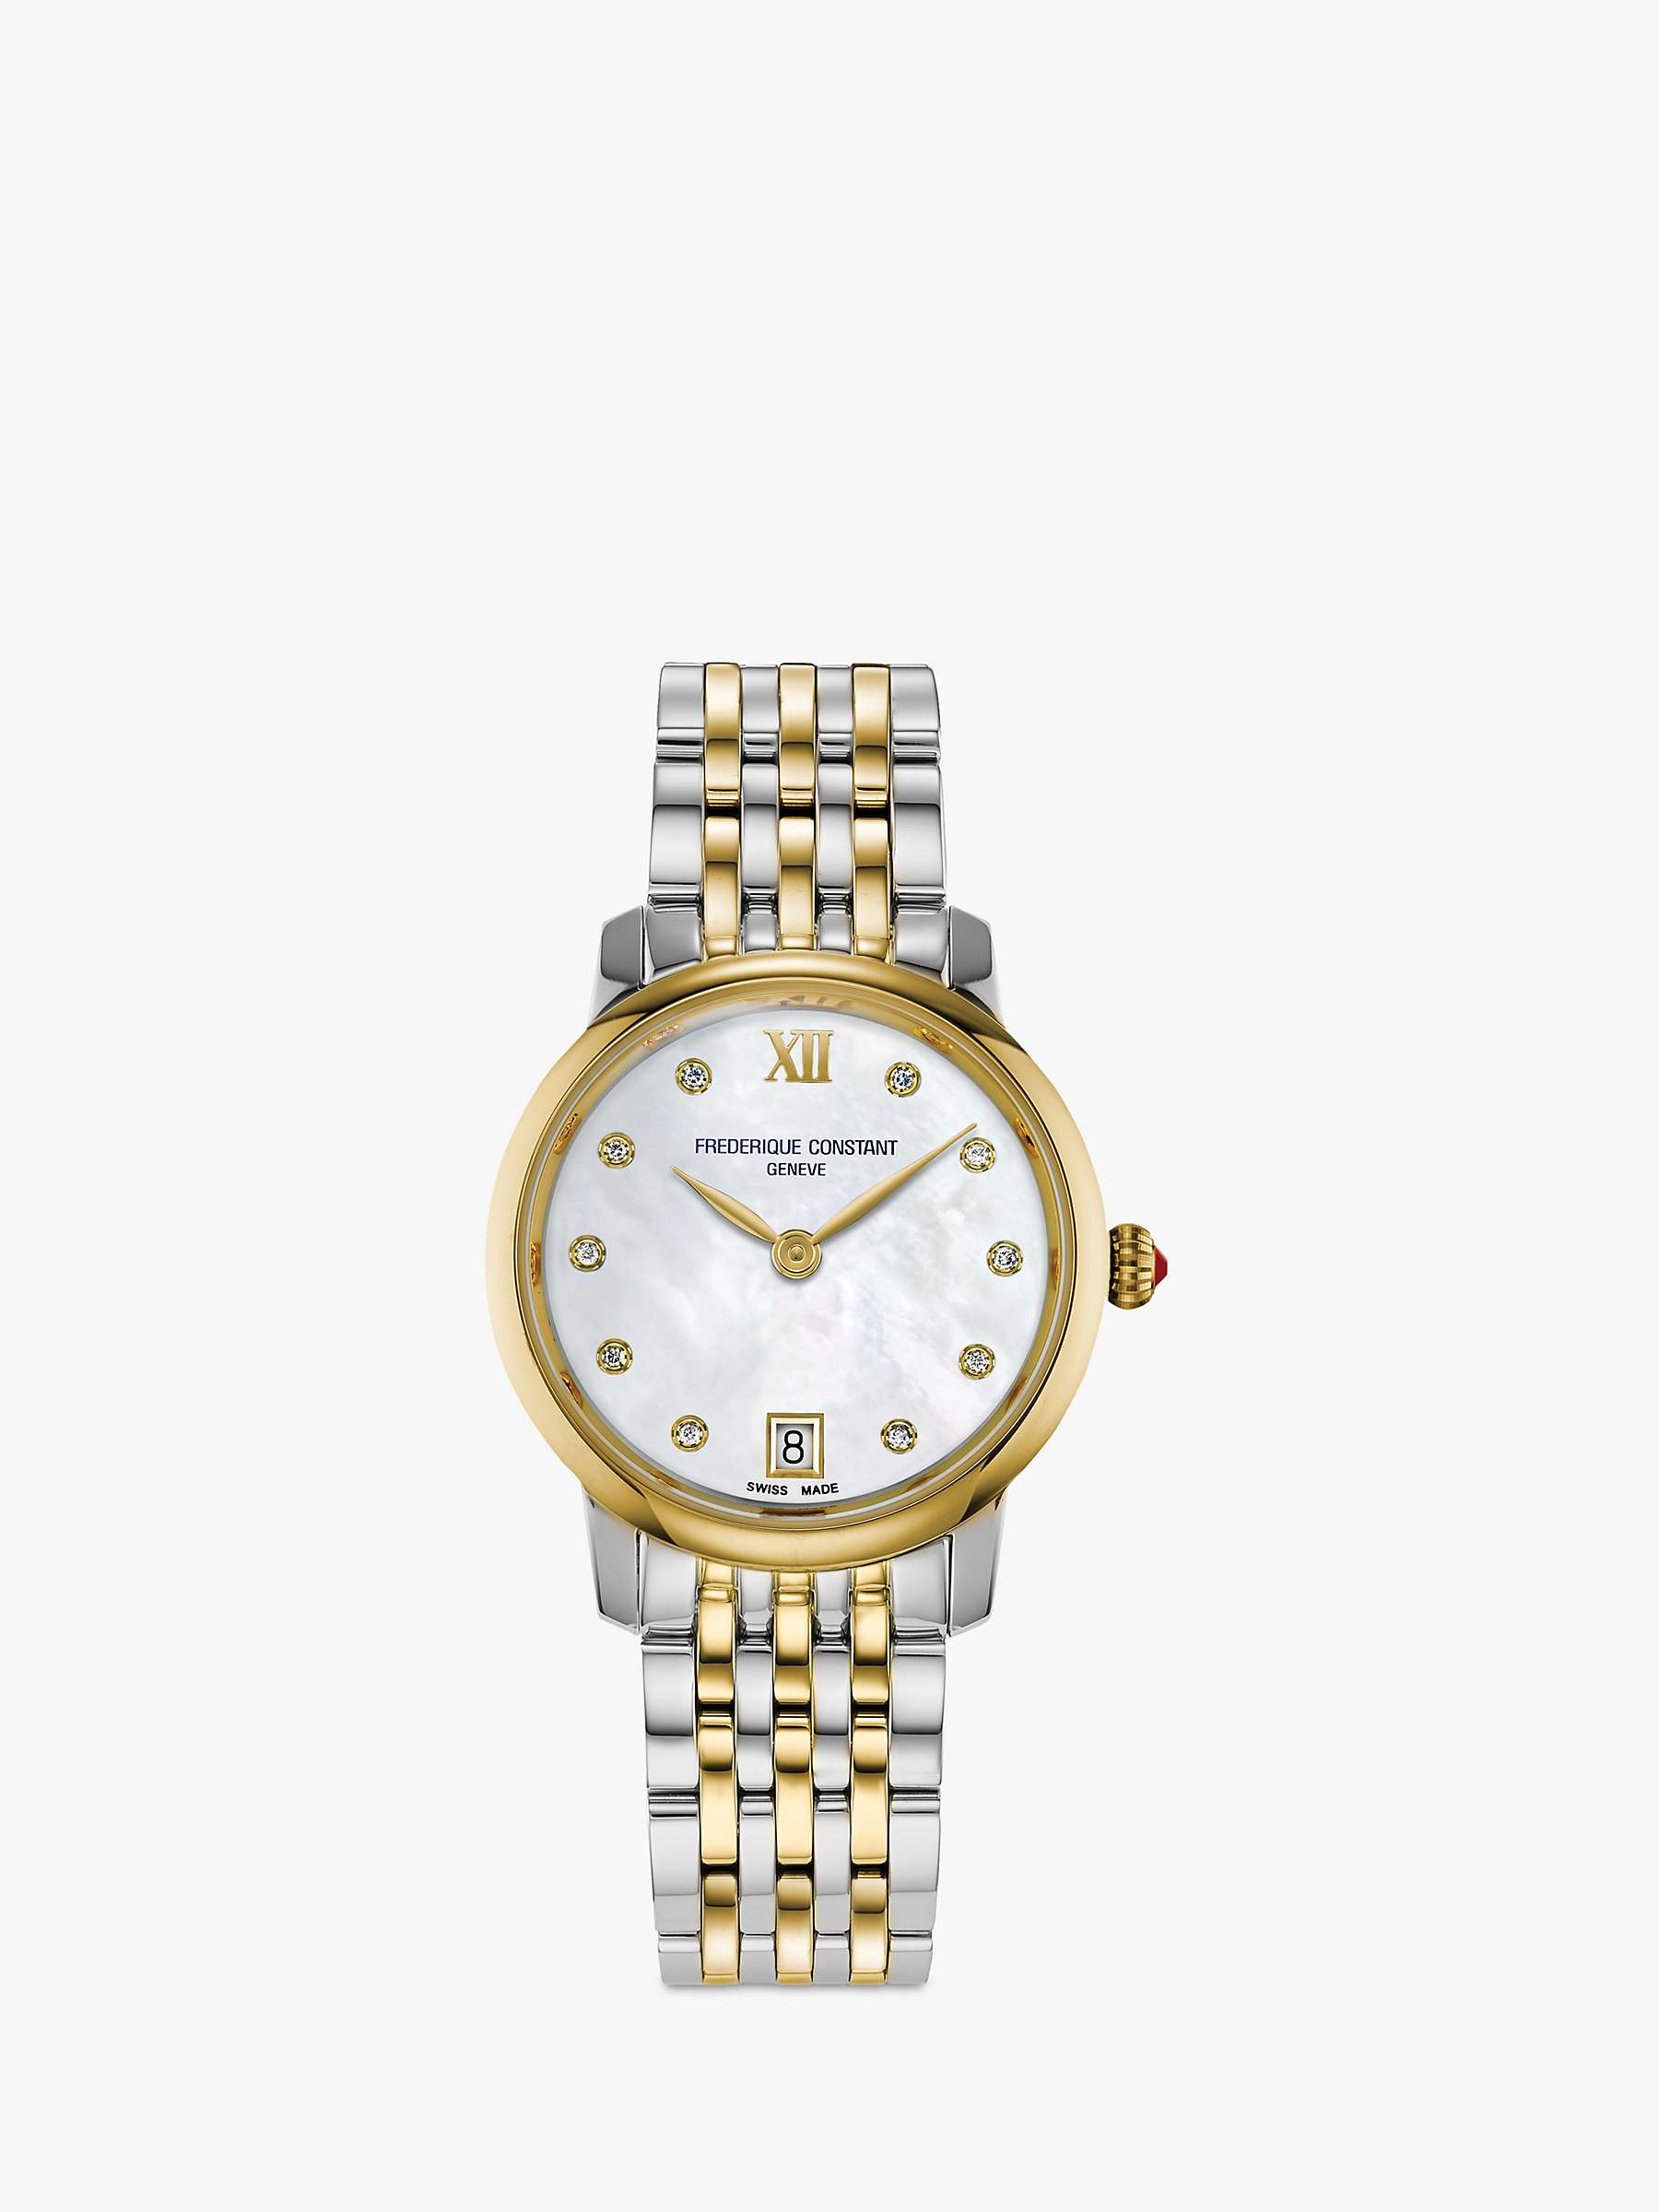 Buy Frederique Constant FC-220MPWD1S23B Women's Classic Slimline Watch, Gold/Silver Online at johnlewis.com